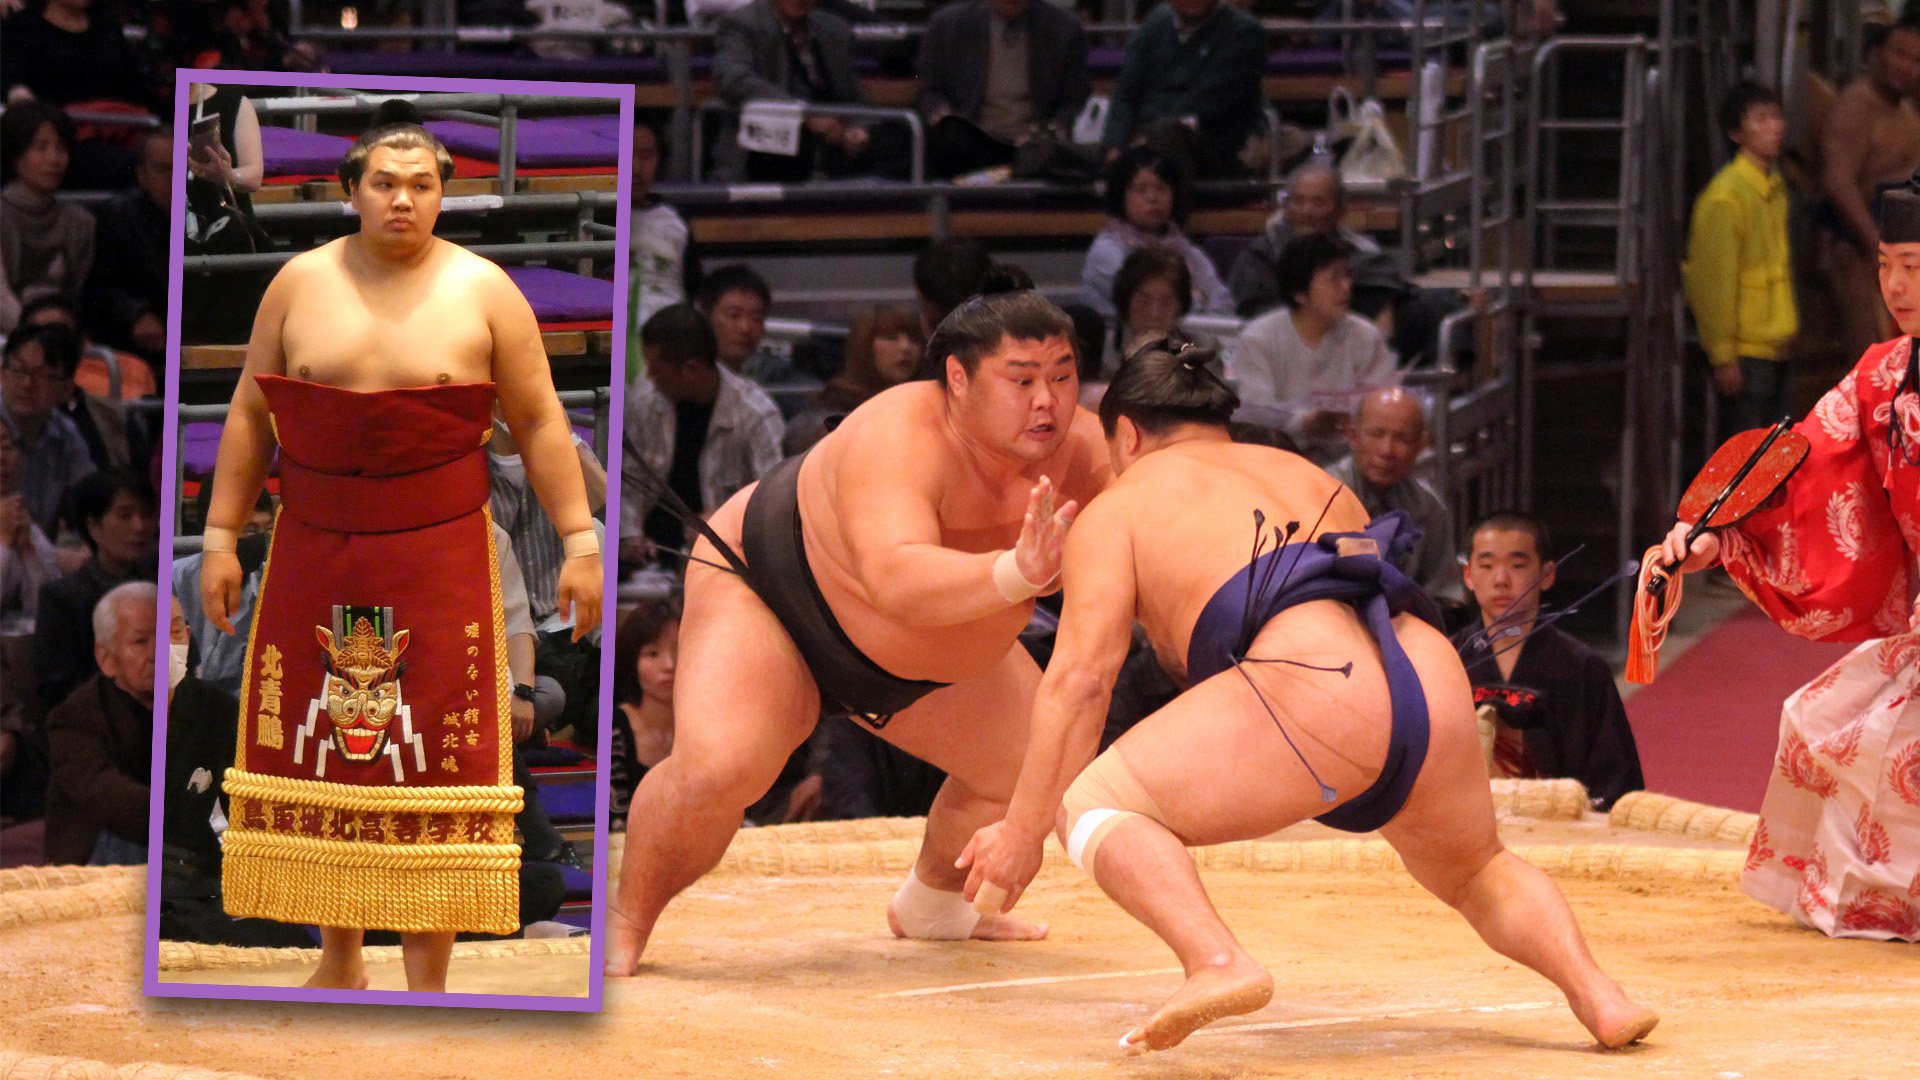 A 22-year-old Mongolian-born top sumo wrestler in Japan has been forced to retire after a vicious campaign of violence and intimidation he carried out against young grapplers was exposed. Photo: SCMP composite/Shutterstock/Wikipedia